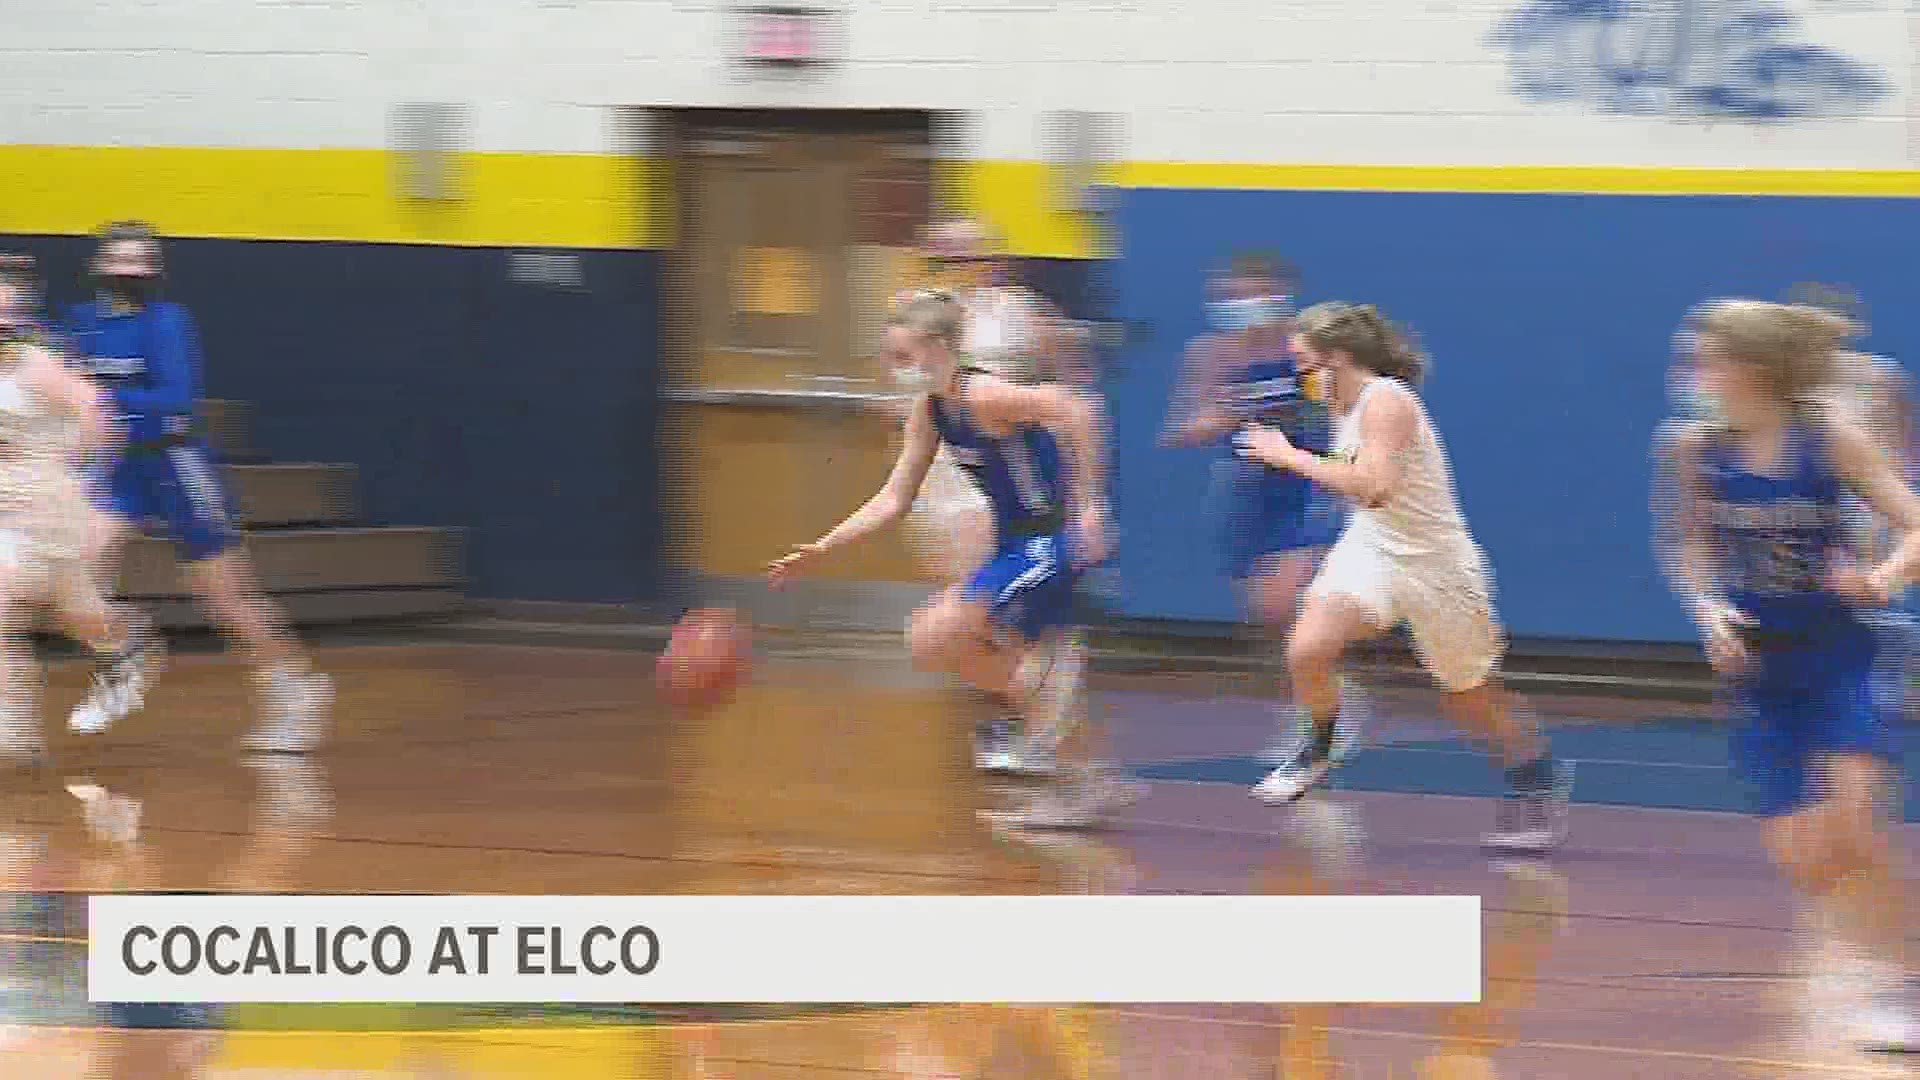 The Eagles edged ELCO, 49-46.